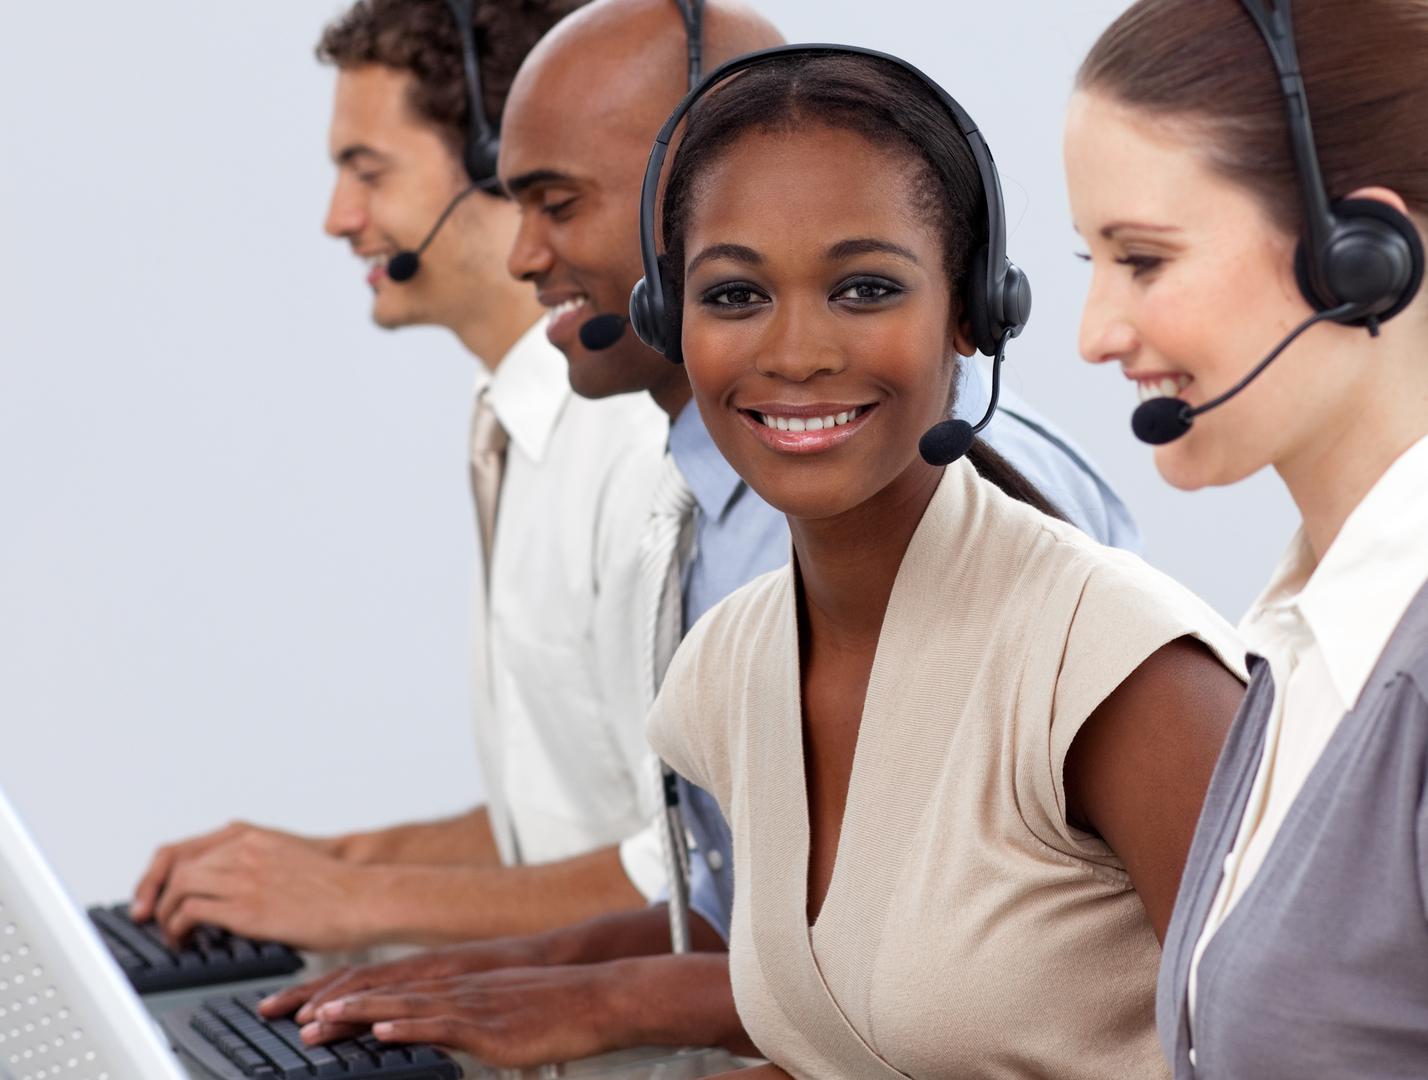 What makes a support experience great for both customer and support agent? Empowerment to serve the customer!